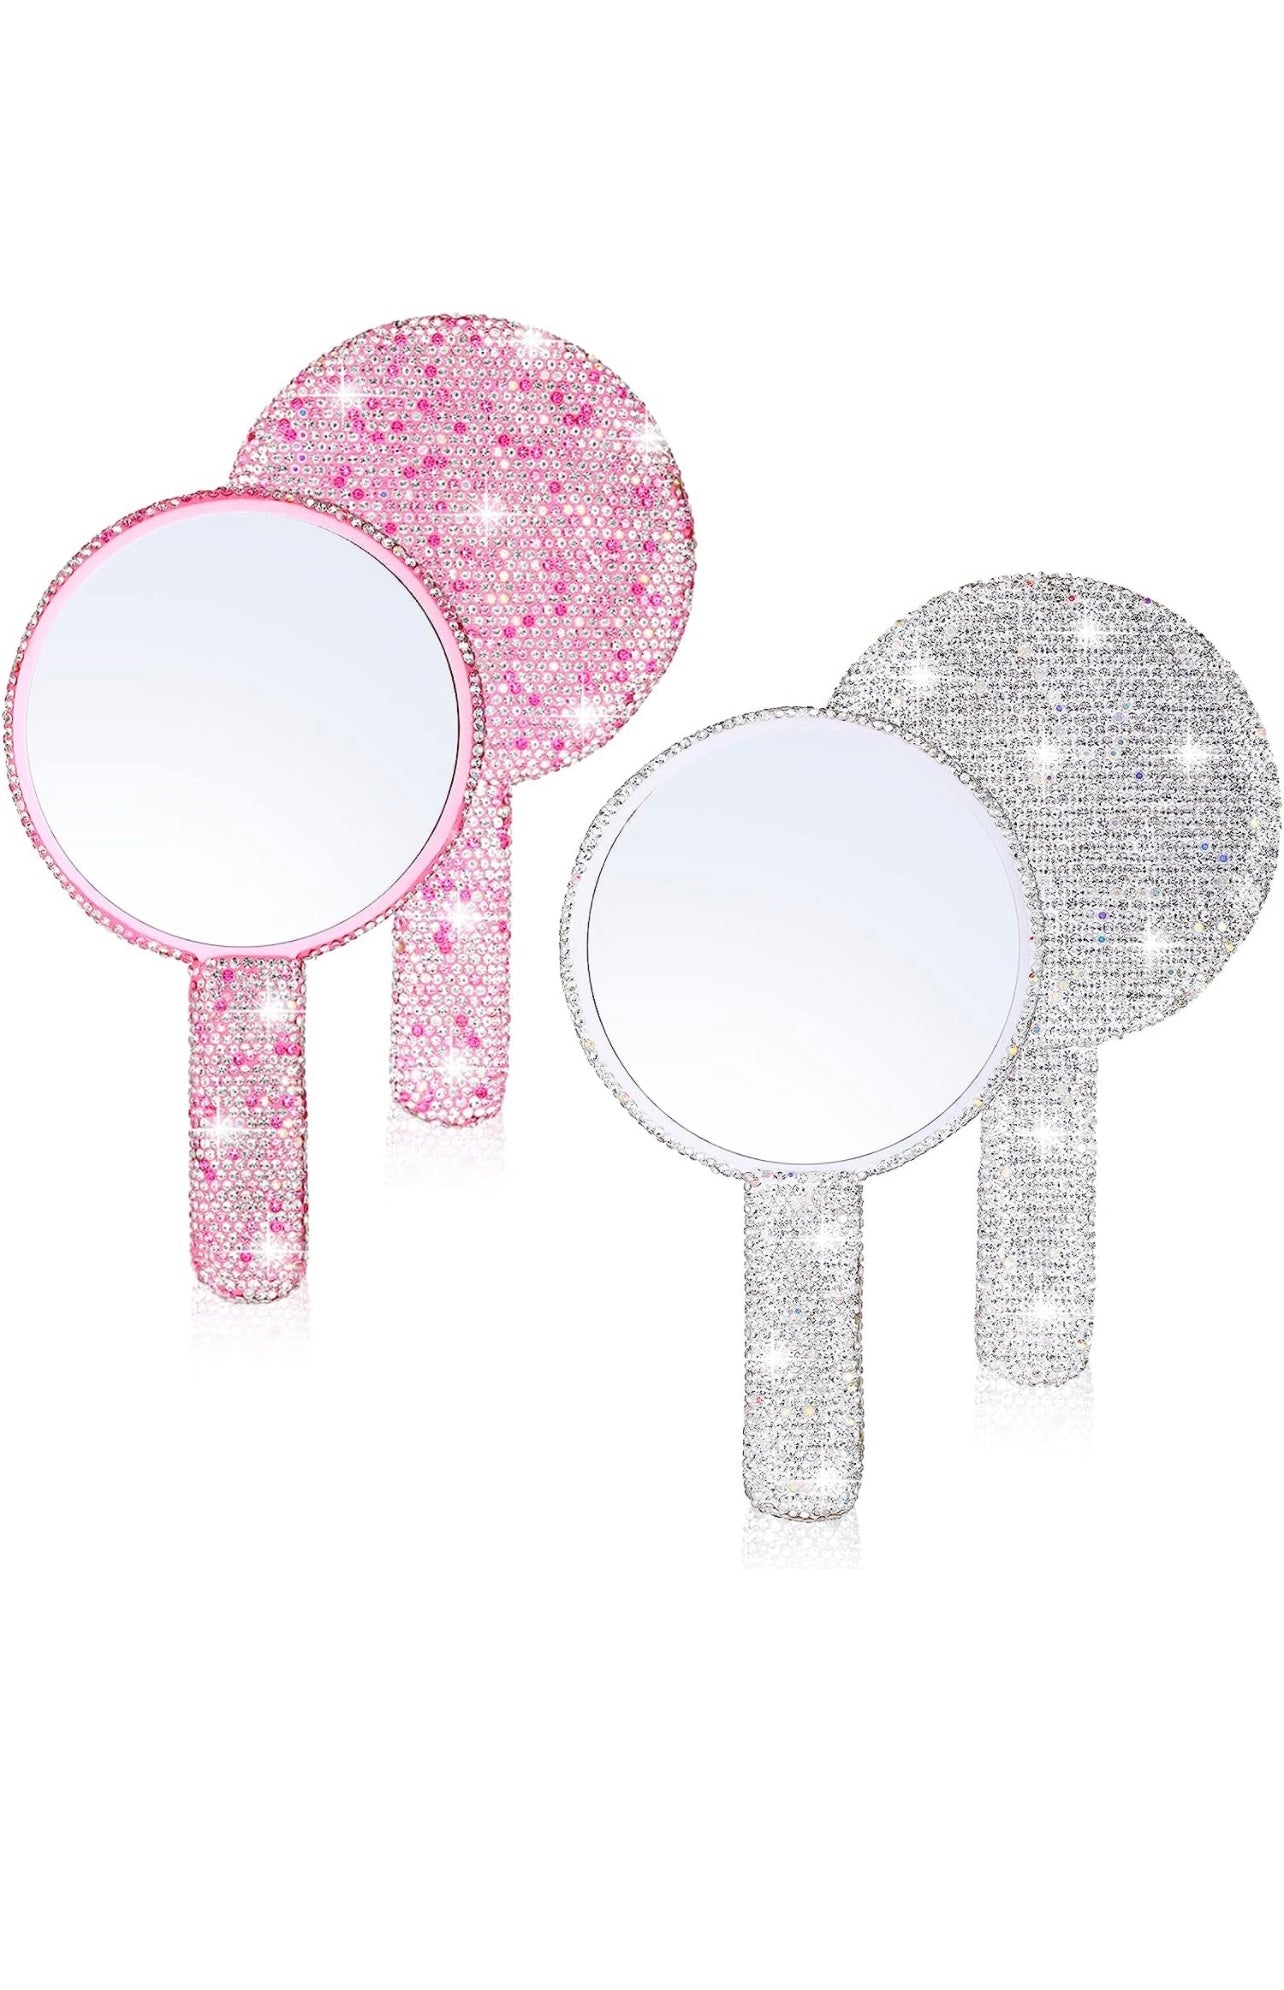 Bedazzled hand held mirrors